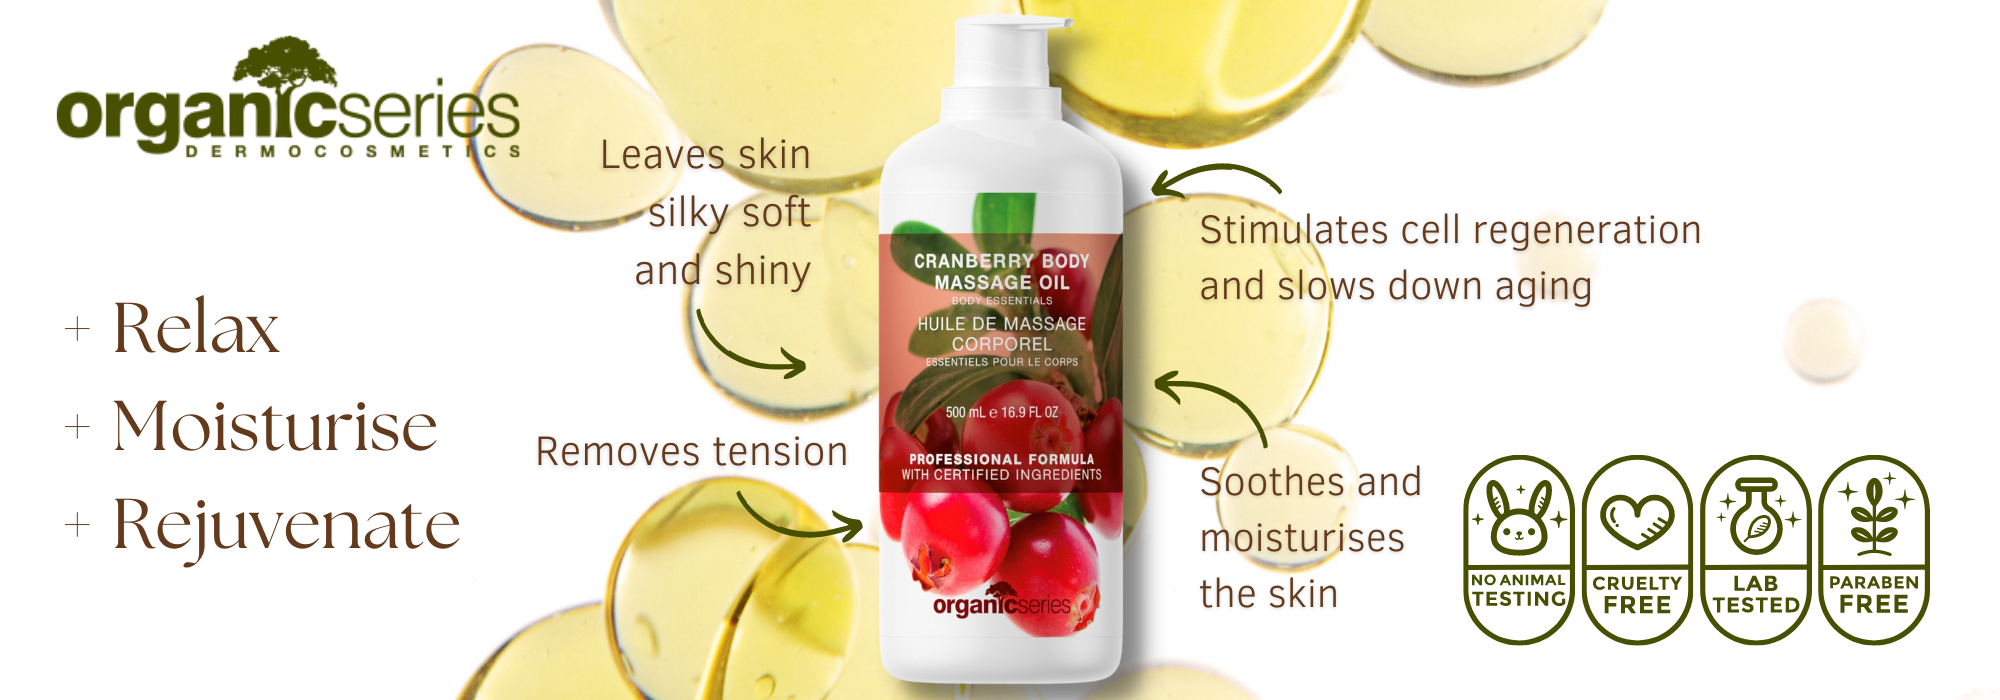 cranberry body massage oil by organic series